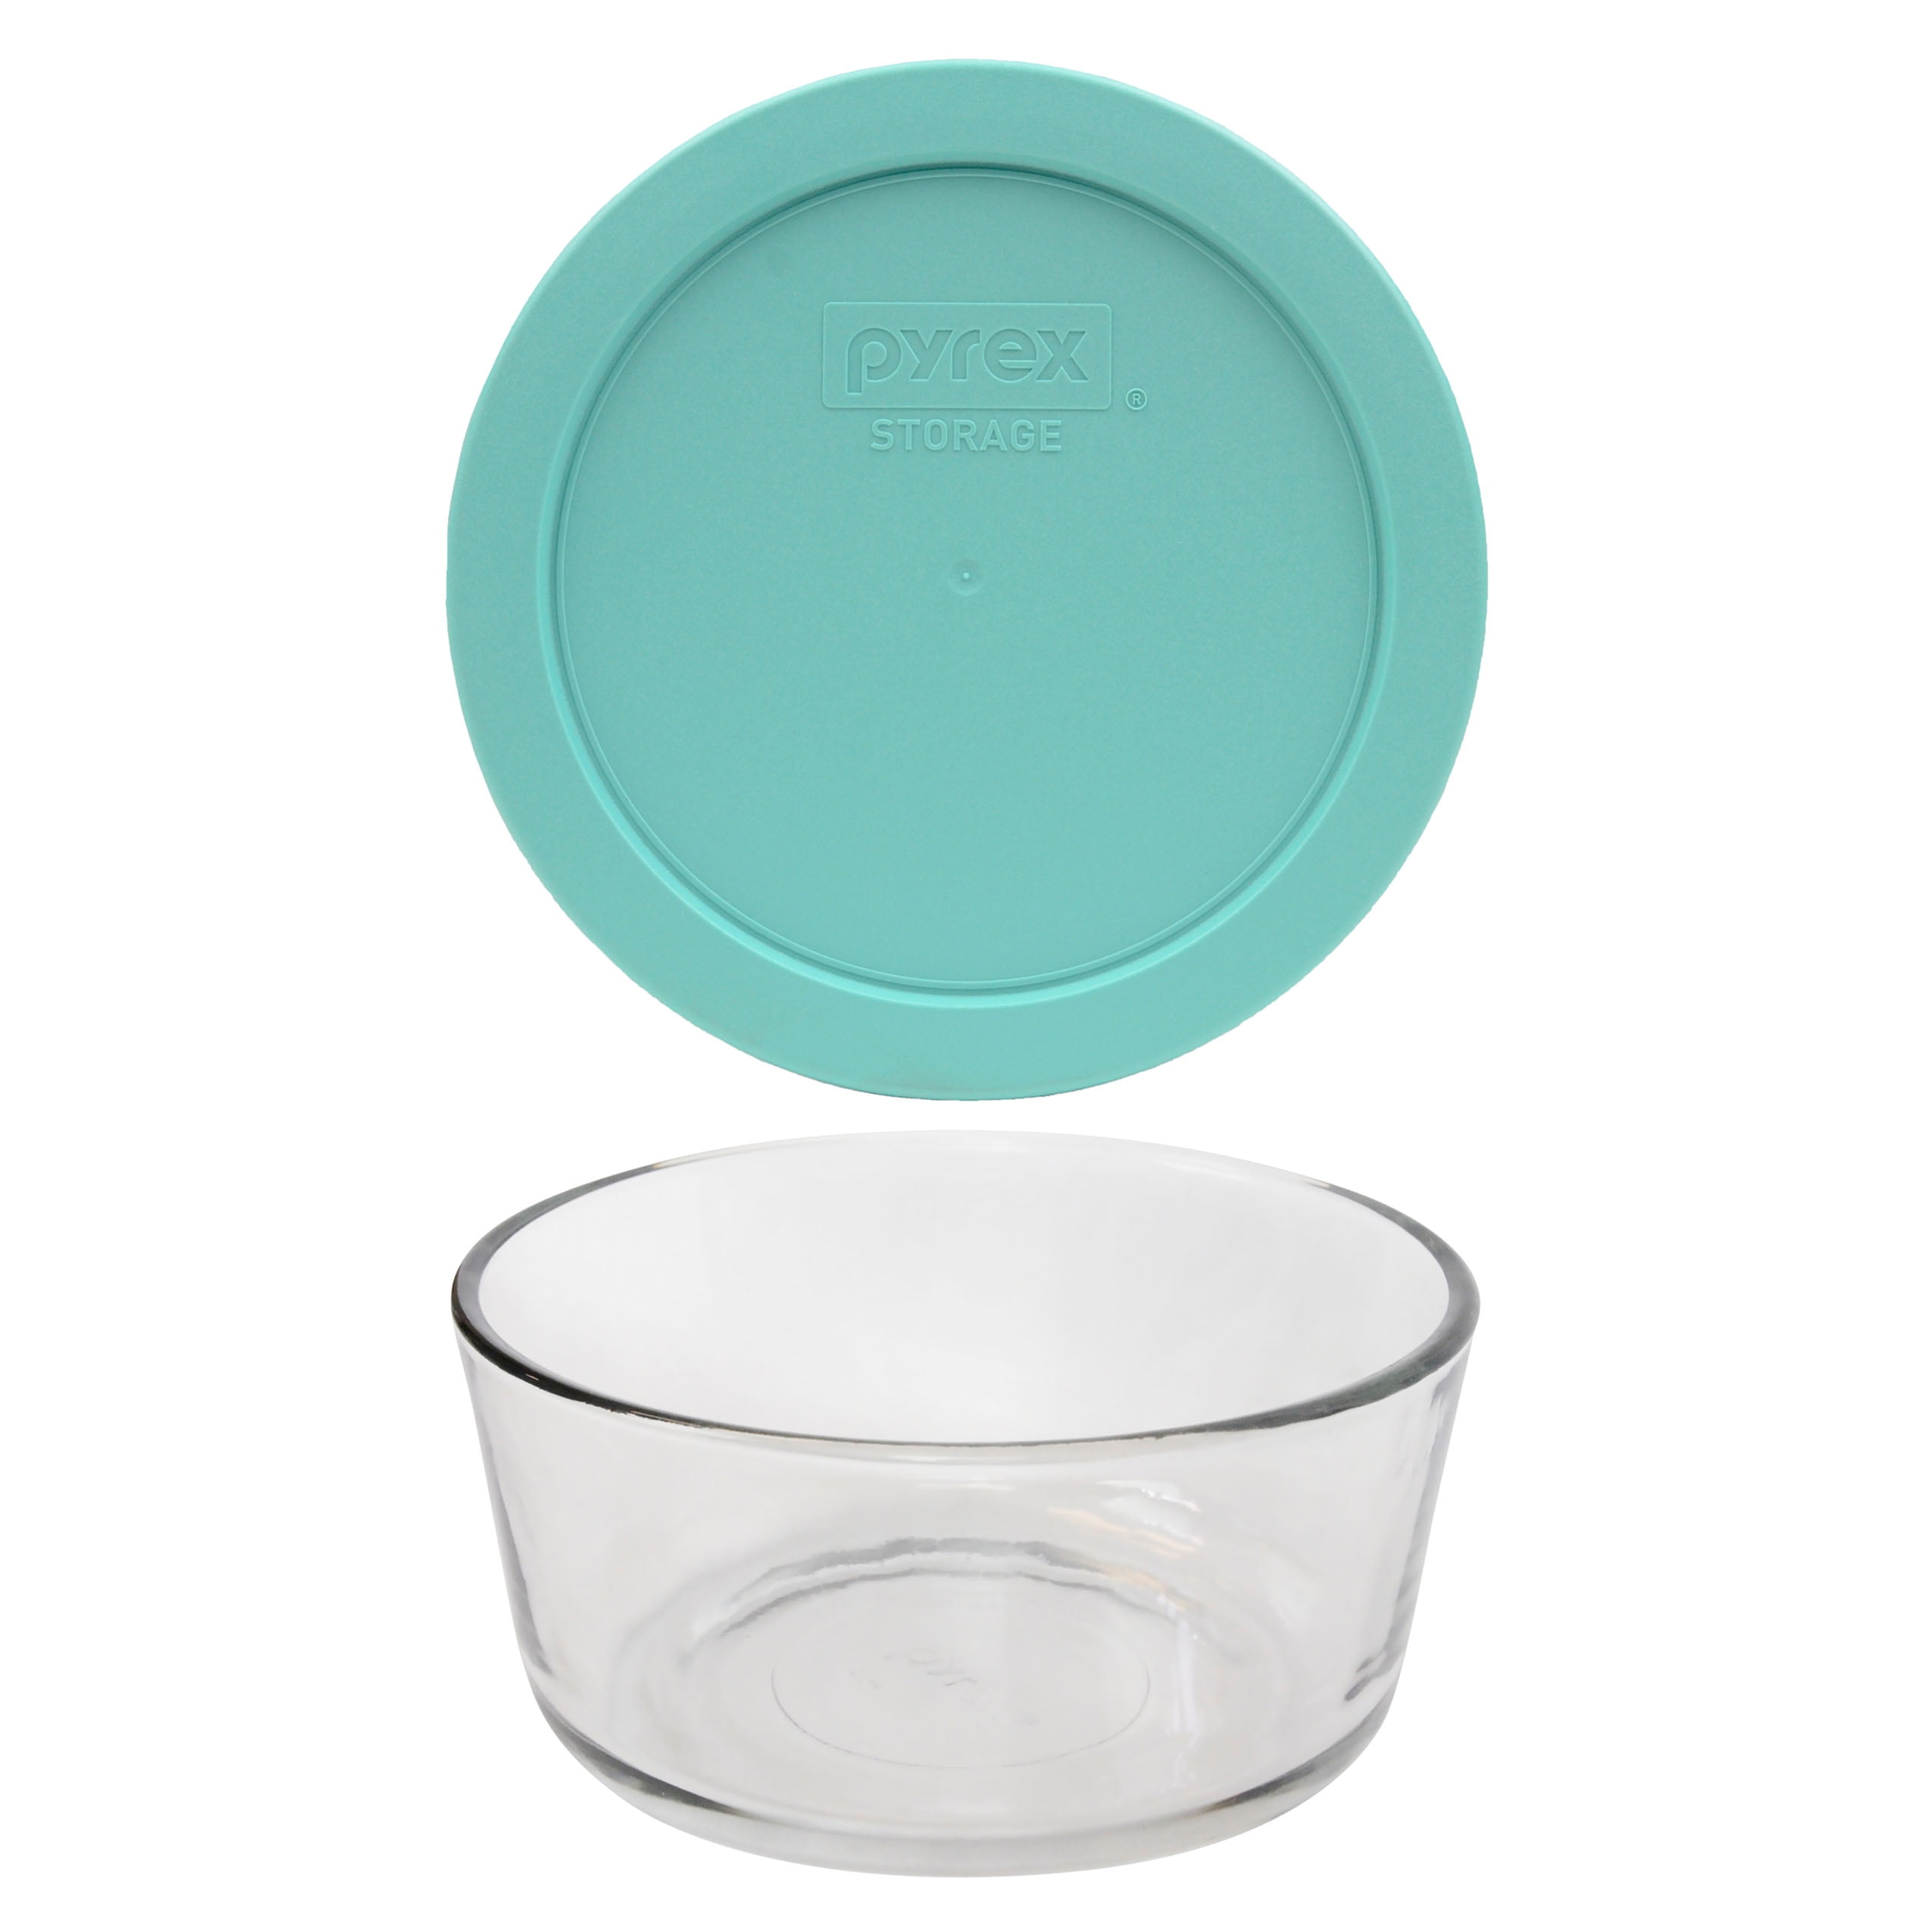 Pyrex 7201-PC Round 4 Cup Storage Lid for Glass Bowls 1, Turquoise 